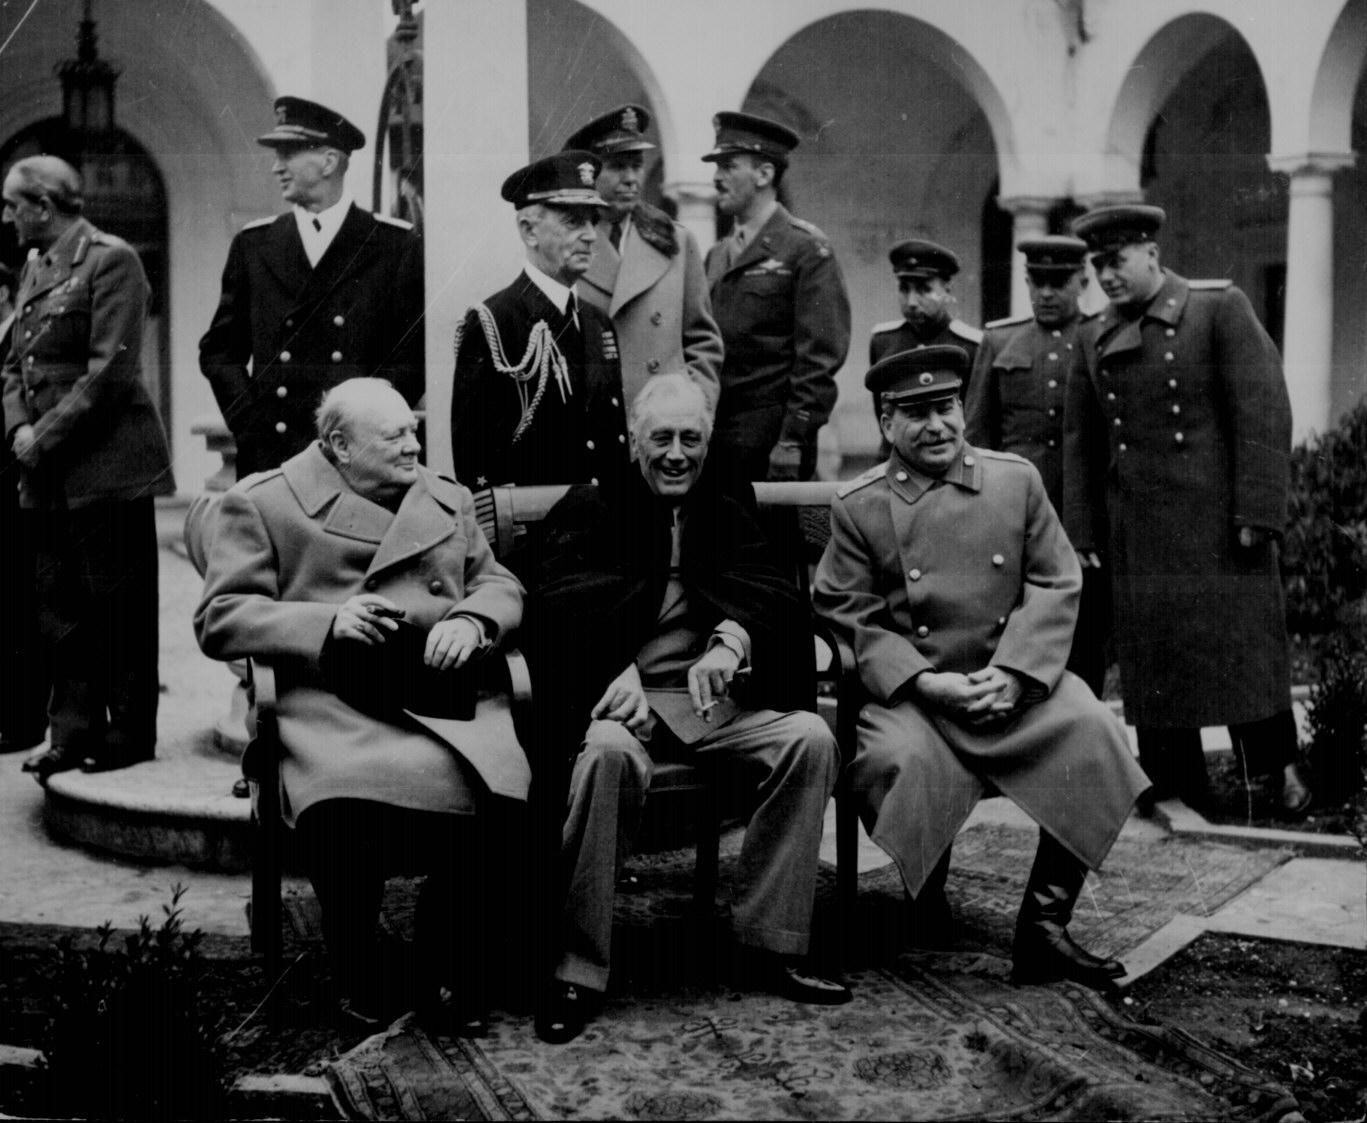 The Yalta Agreement The Yalta Conference Historical Resources About The Second World War